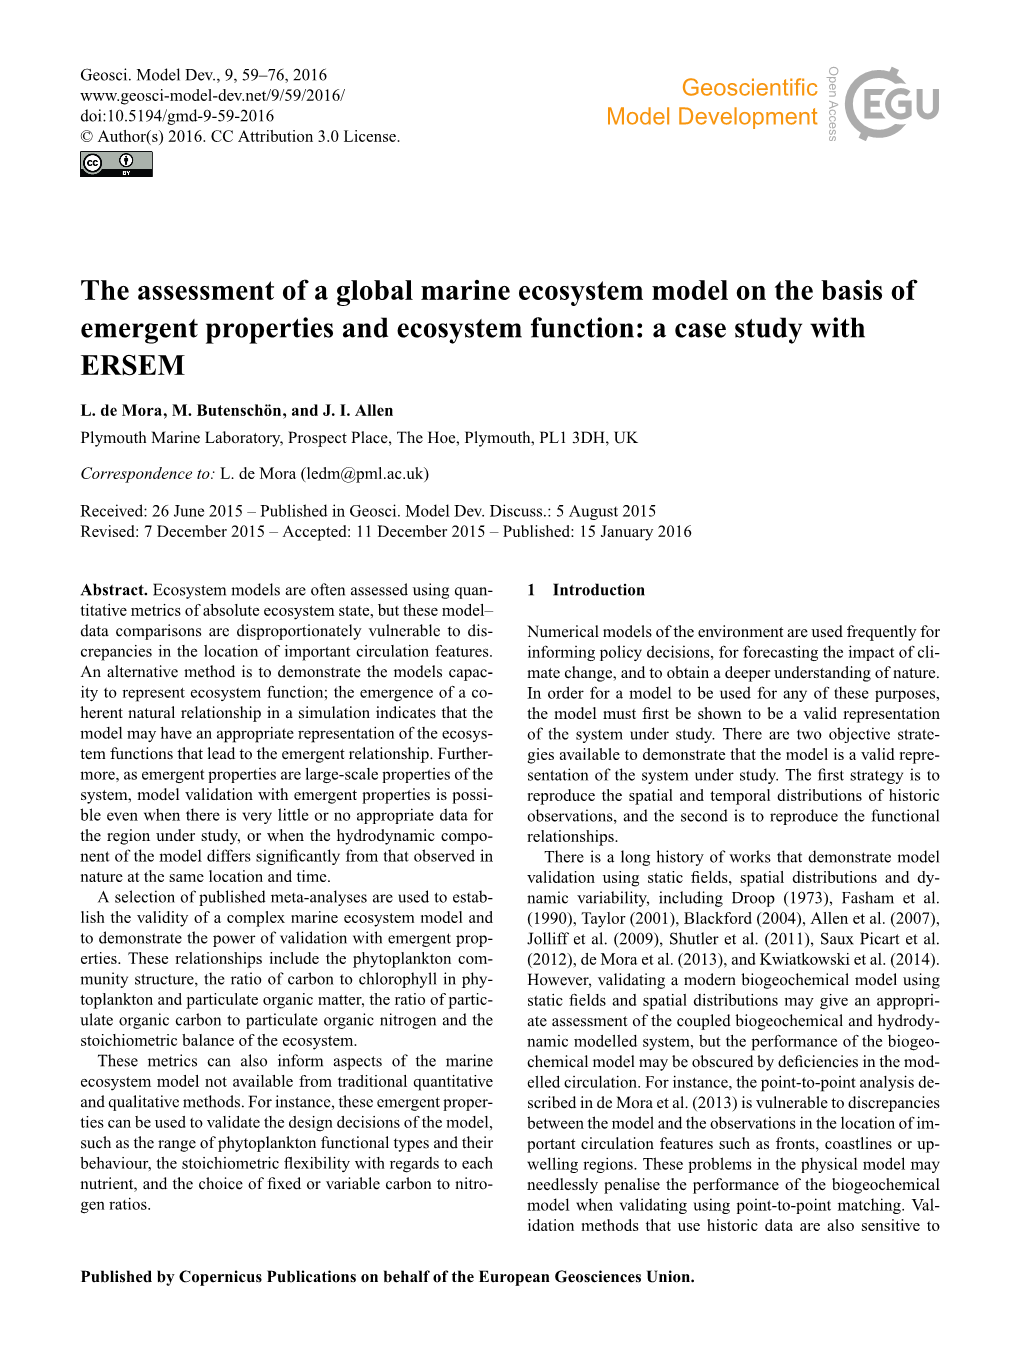 The Assessment of a Global Marine Ecosystem Model on the Basis of Emergent Properties and Ecosystem Function: a Case Study with ERSEM